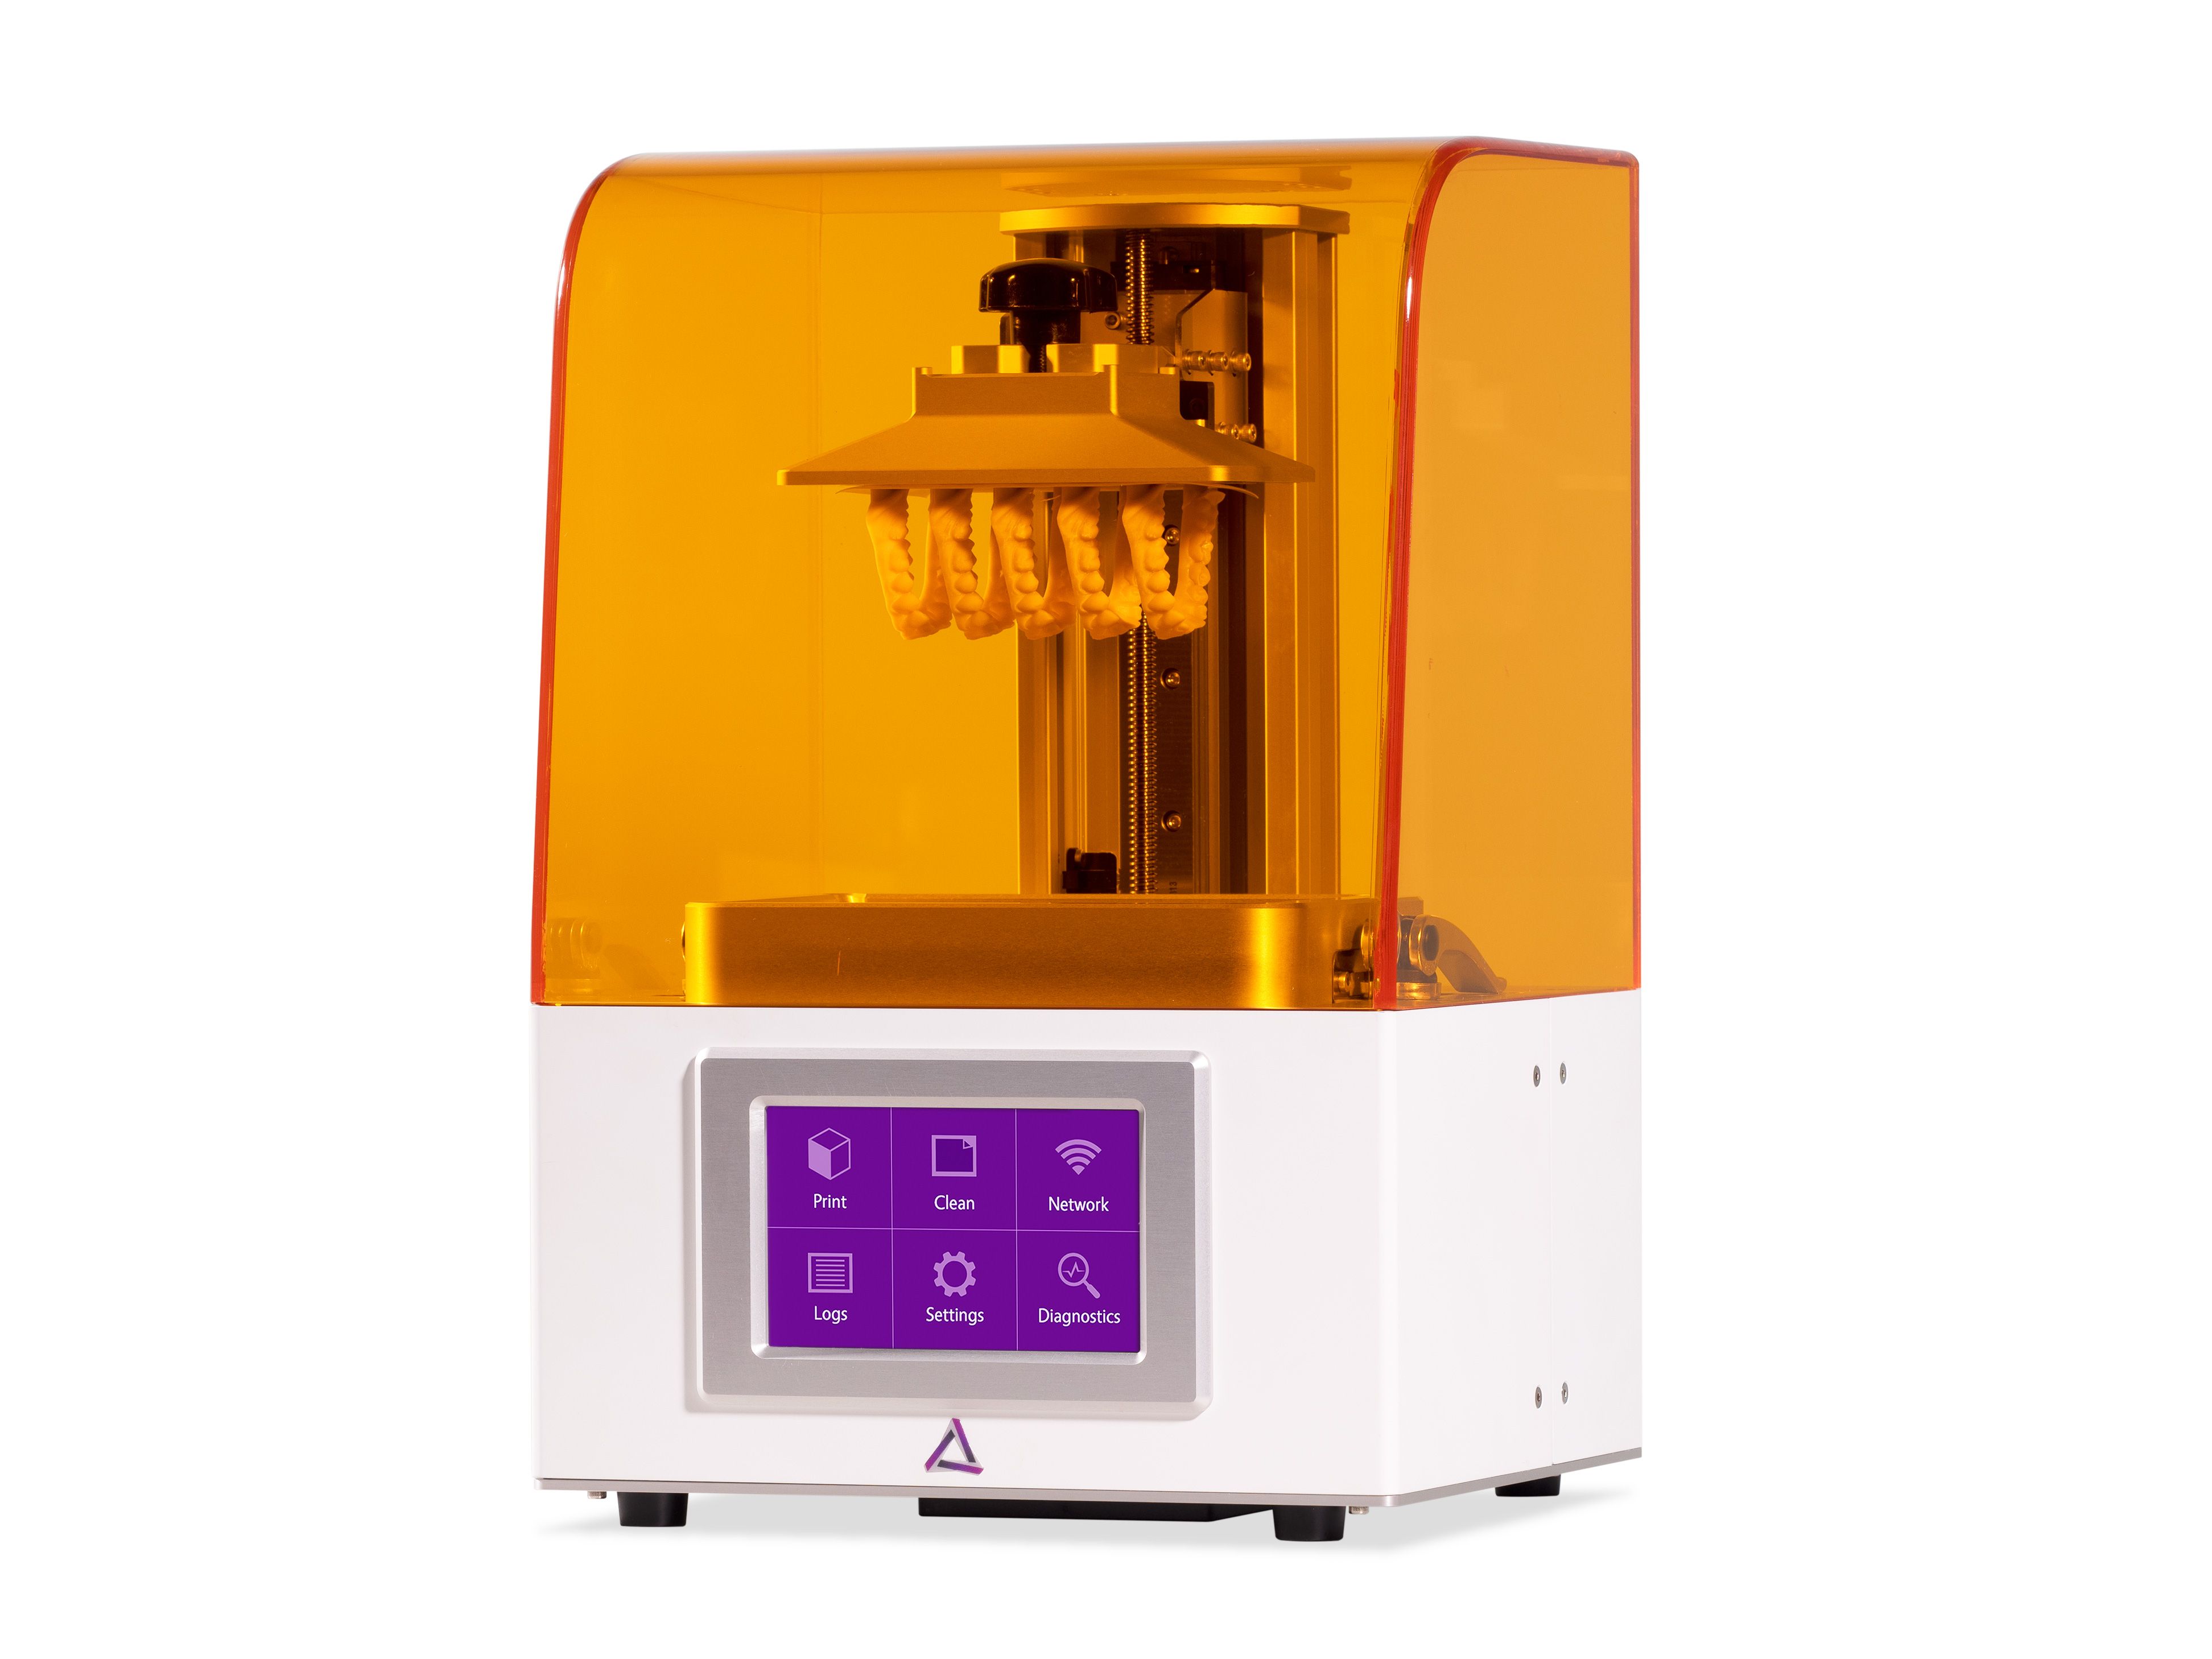 The FreeShape professional-grade 3D printer by Ackuretta is now available from Primotec. 